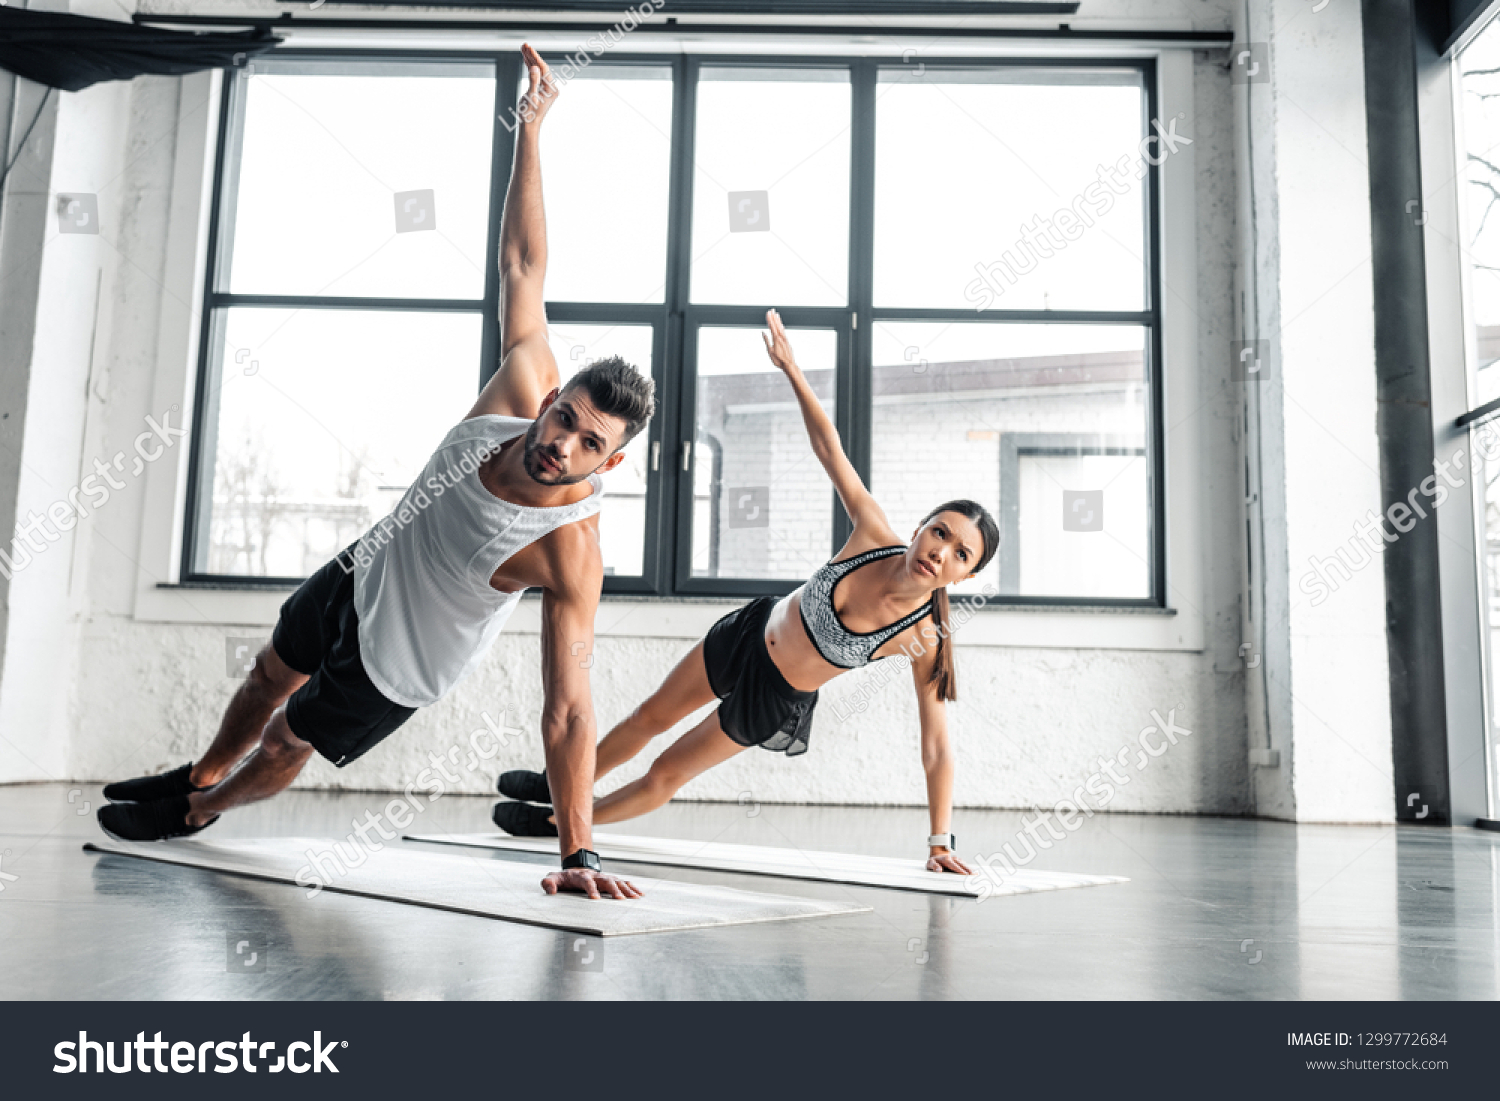 full length view of athletic young couple doing side plank exercise on yoga mats in gym #1299772684